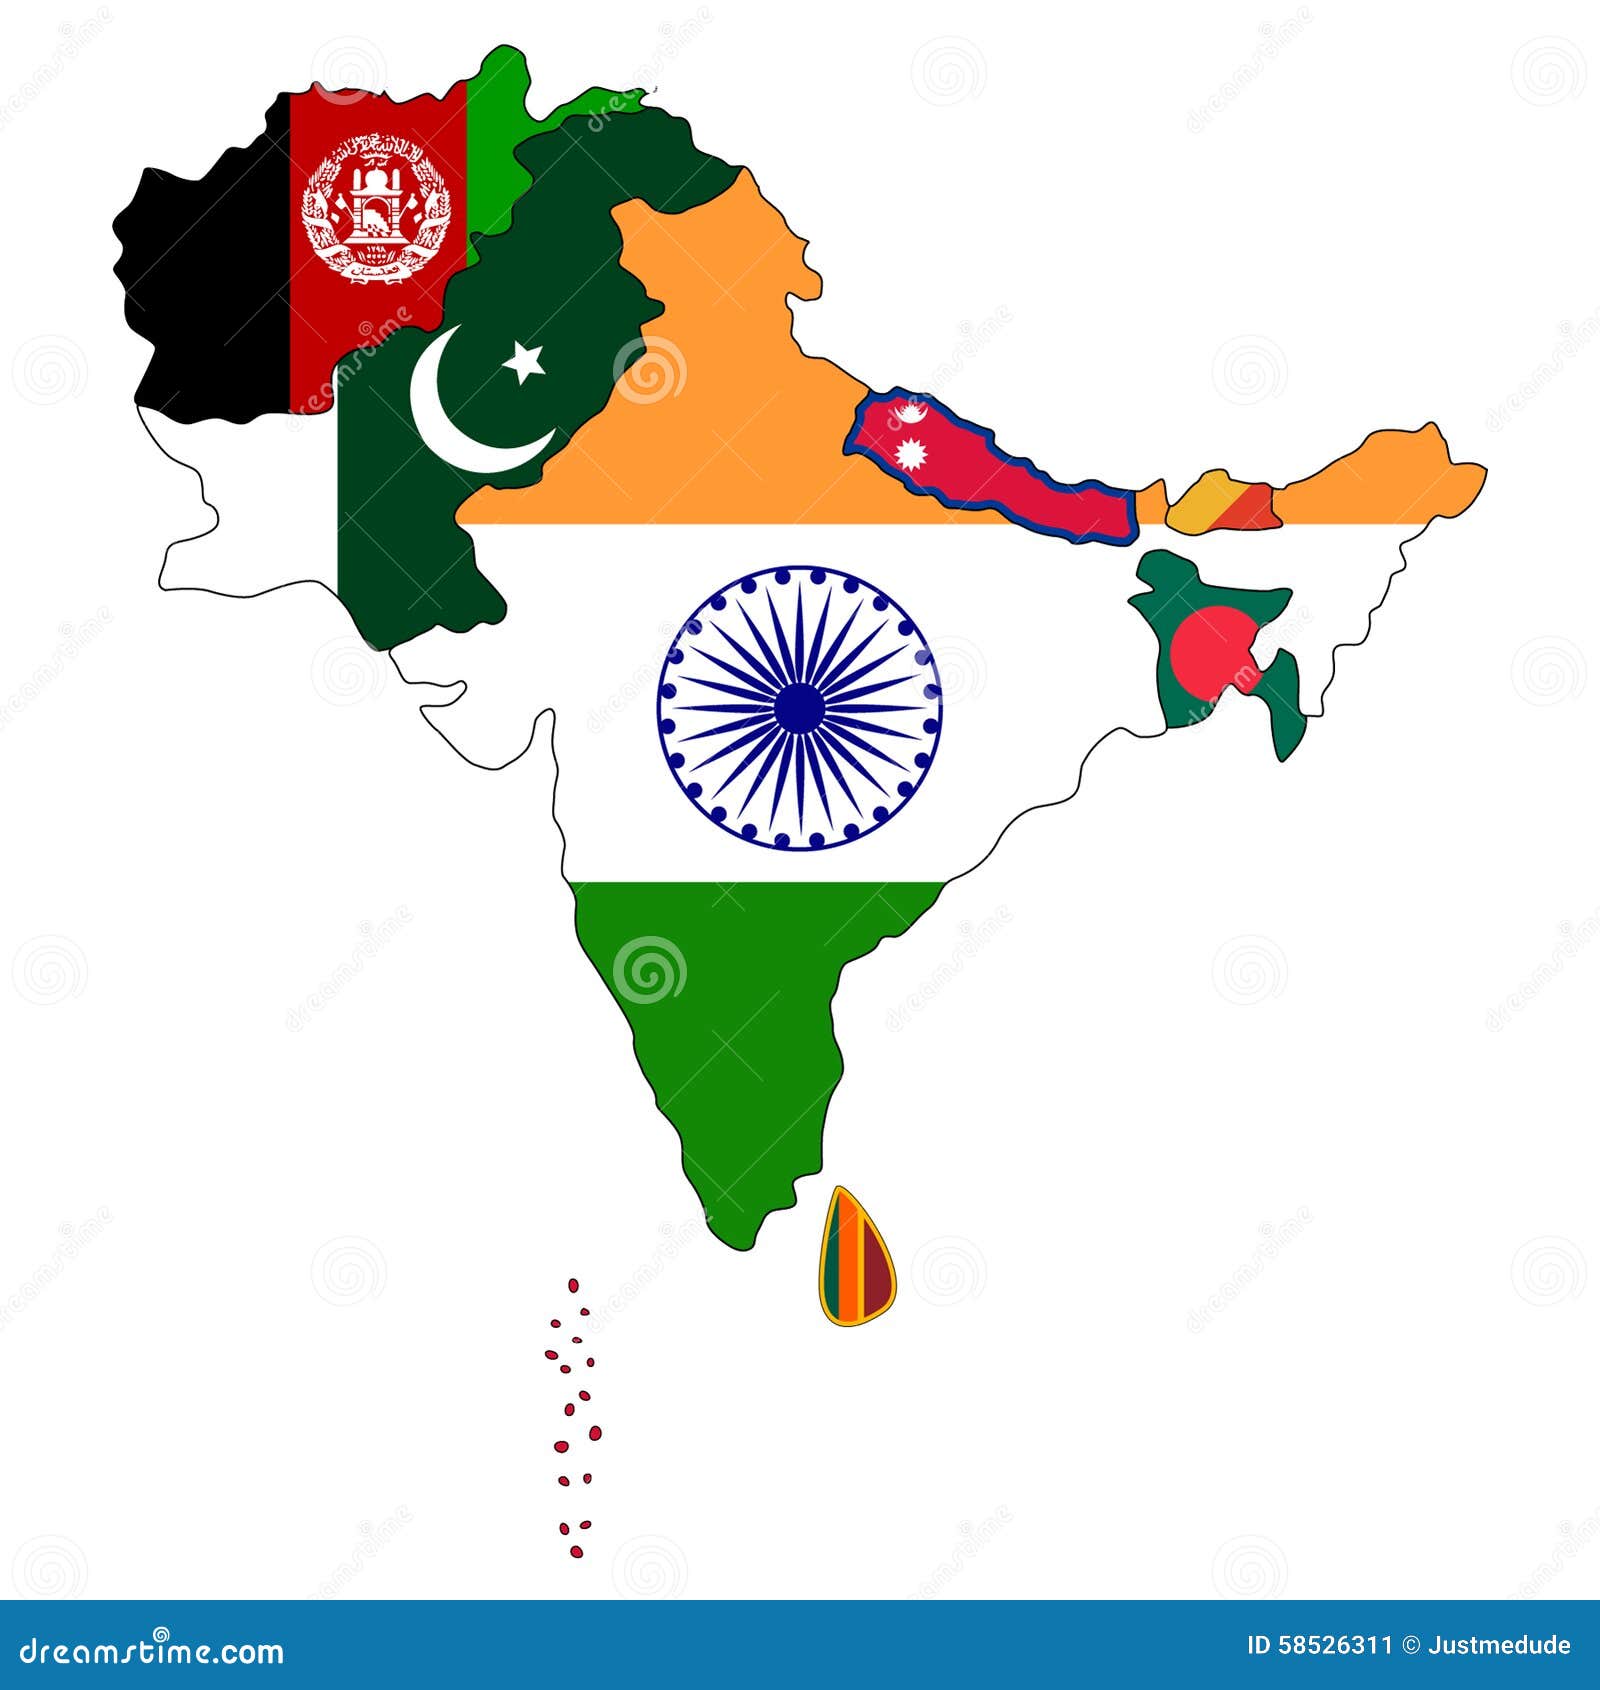 https://thumbs.dreamstime.com/z/south-asia-map-counties-filled-national-flag-58526311.jpg